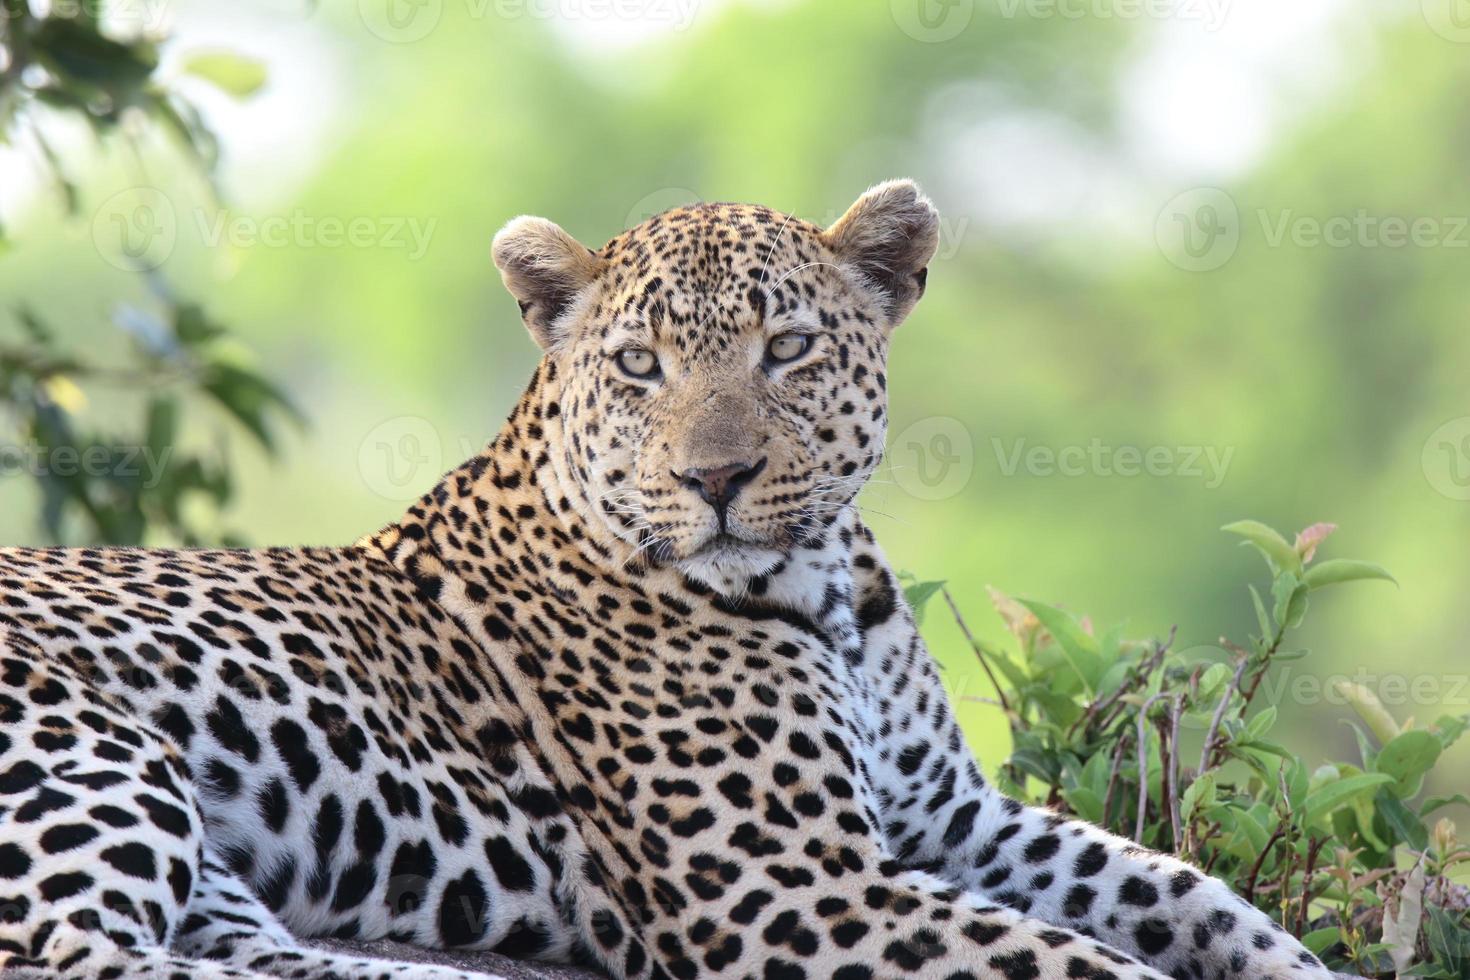 A close-up photo of a male leopard, looking at the camera, spotted while on safari in the Sabi Sands game reserve.